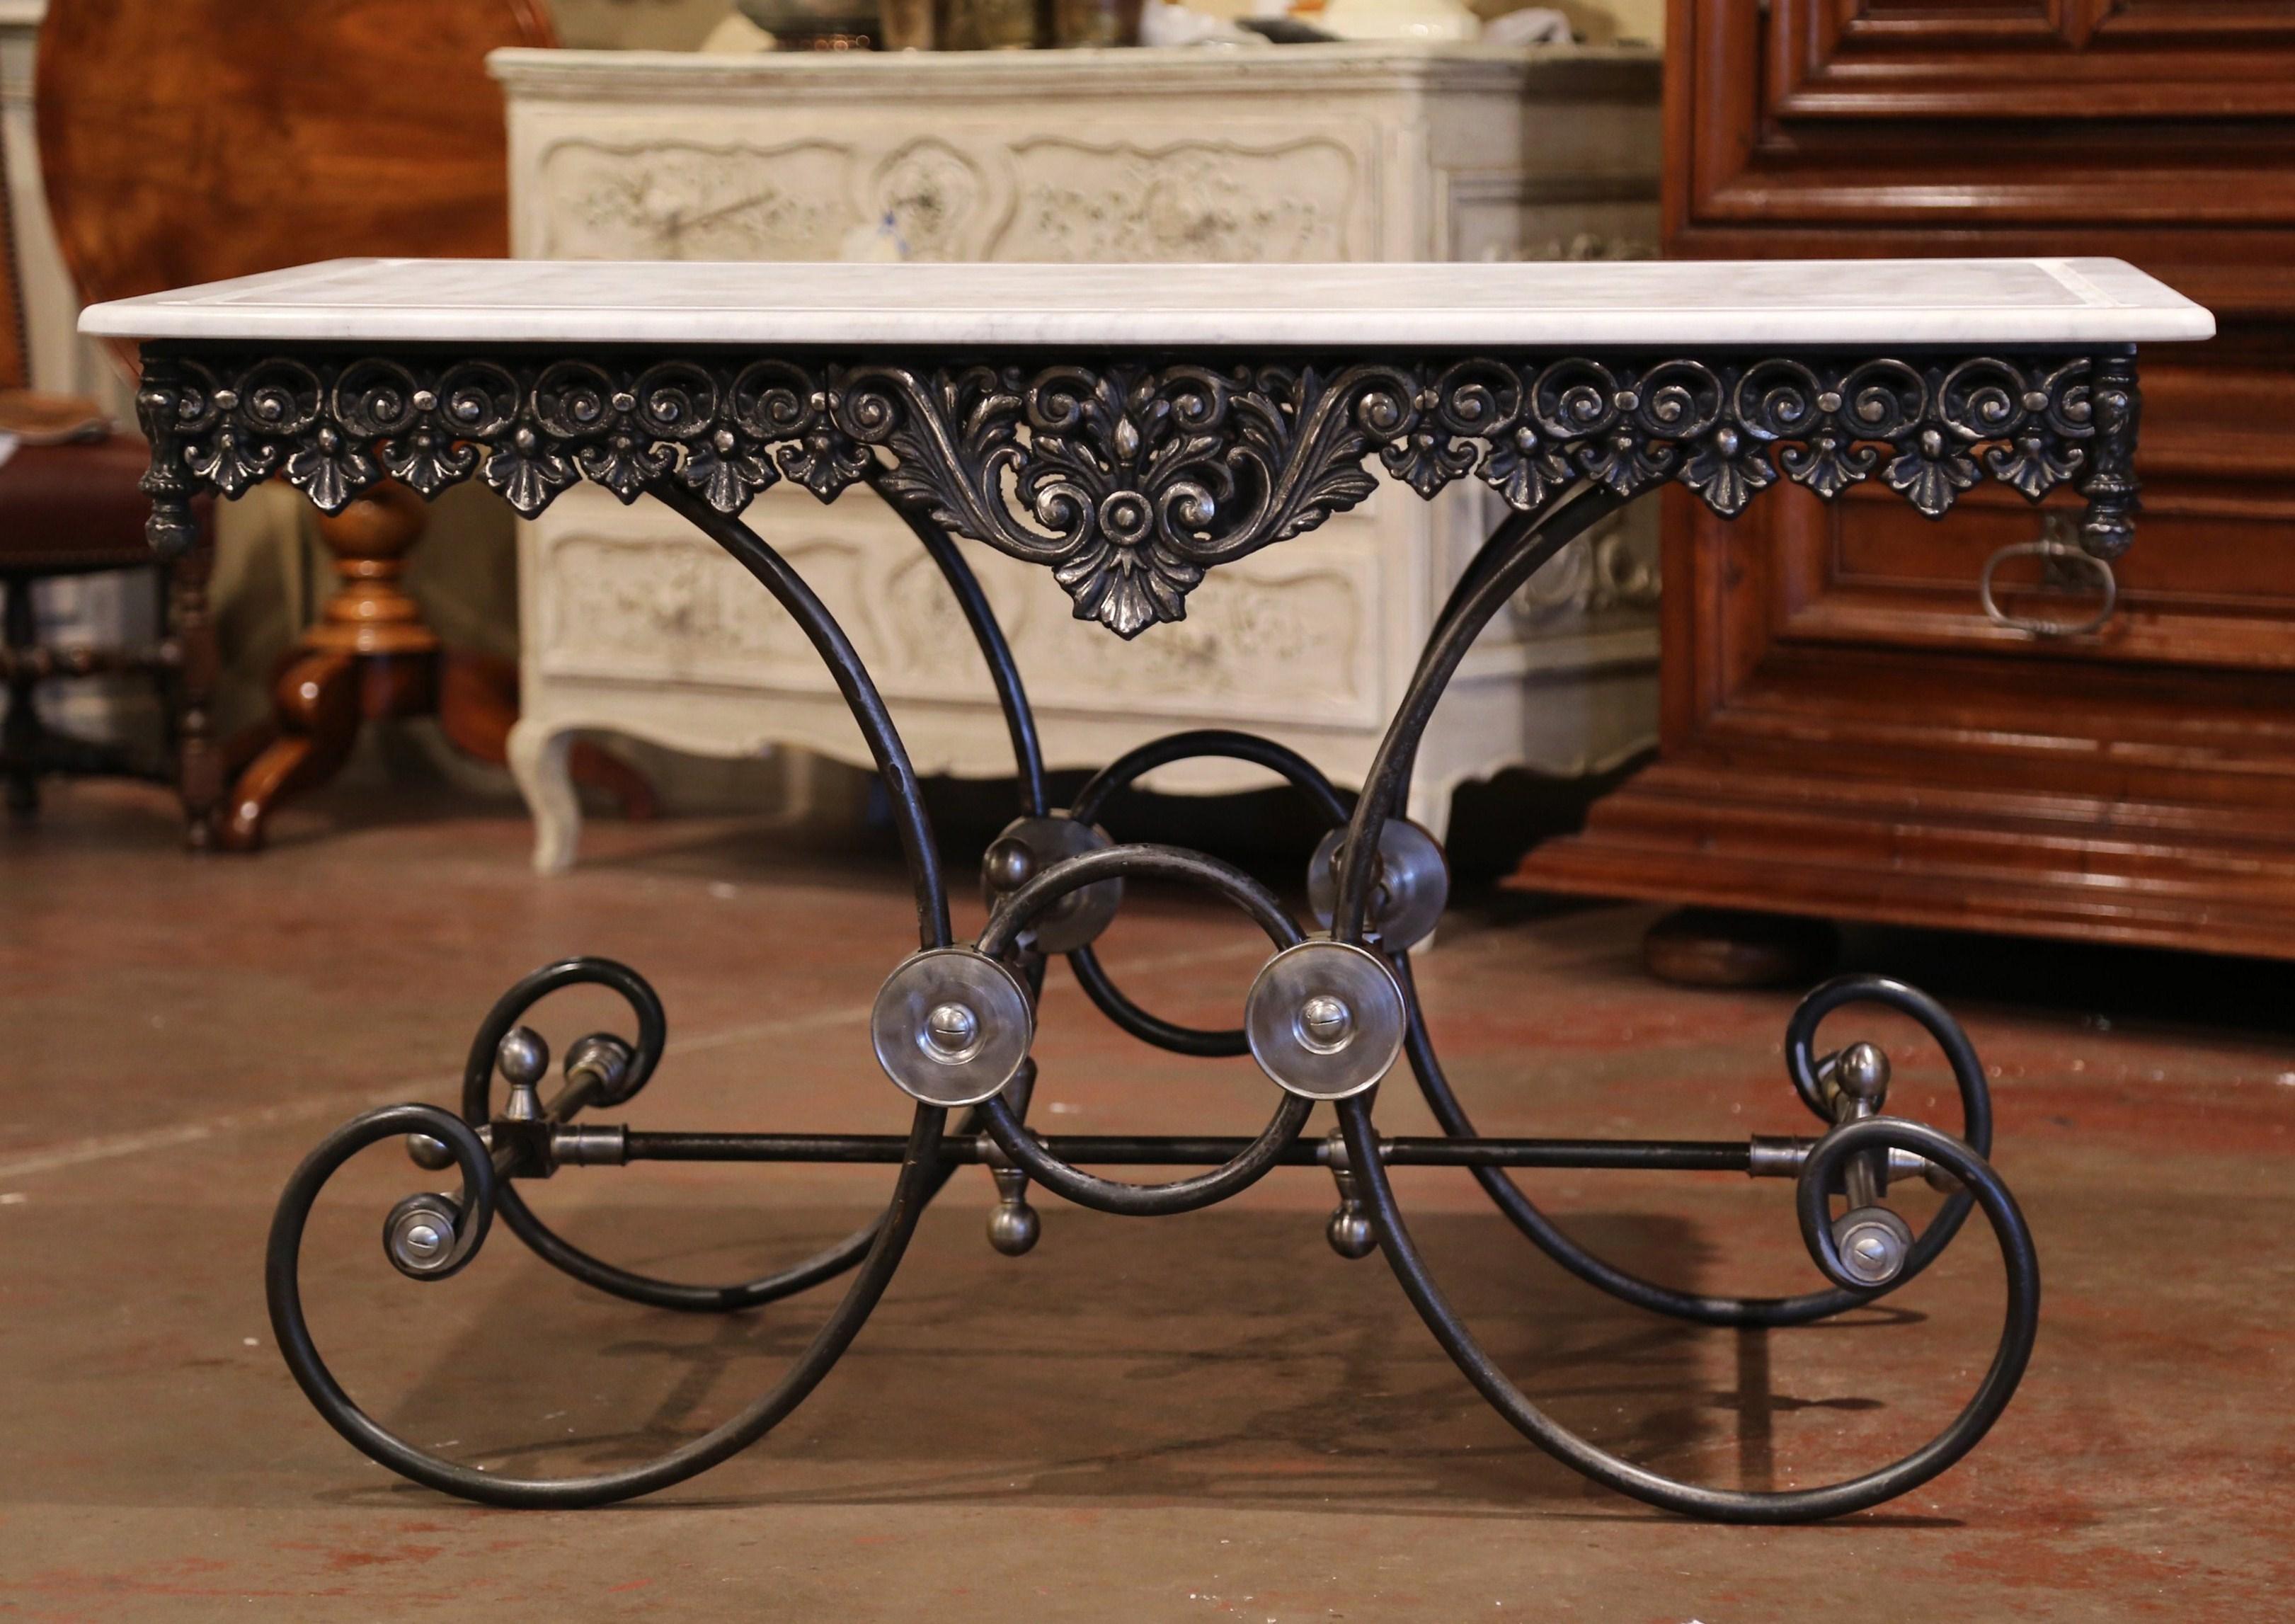 This large butcher table, or pastry table, would add the ideal amount of surface space to any kitchen. Crafted in France, this table stands on four scrolled legs over an intricate stretcher and decorative mounts and finials. The table has a